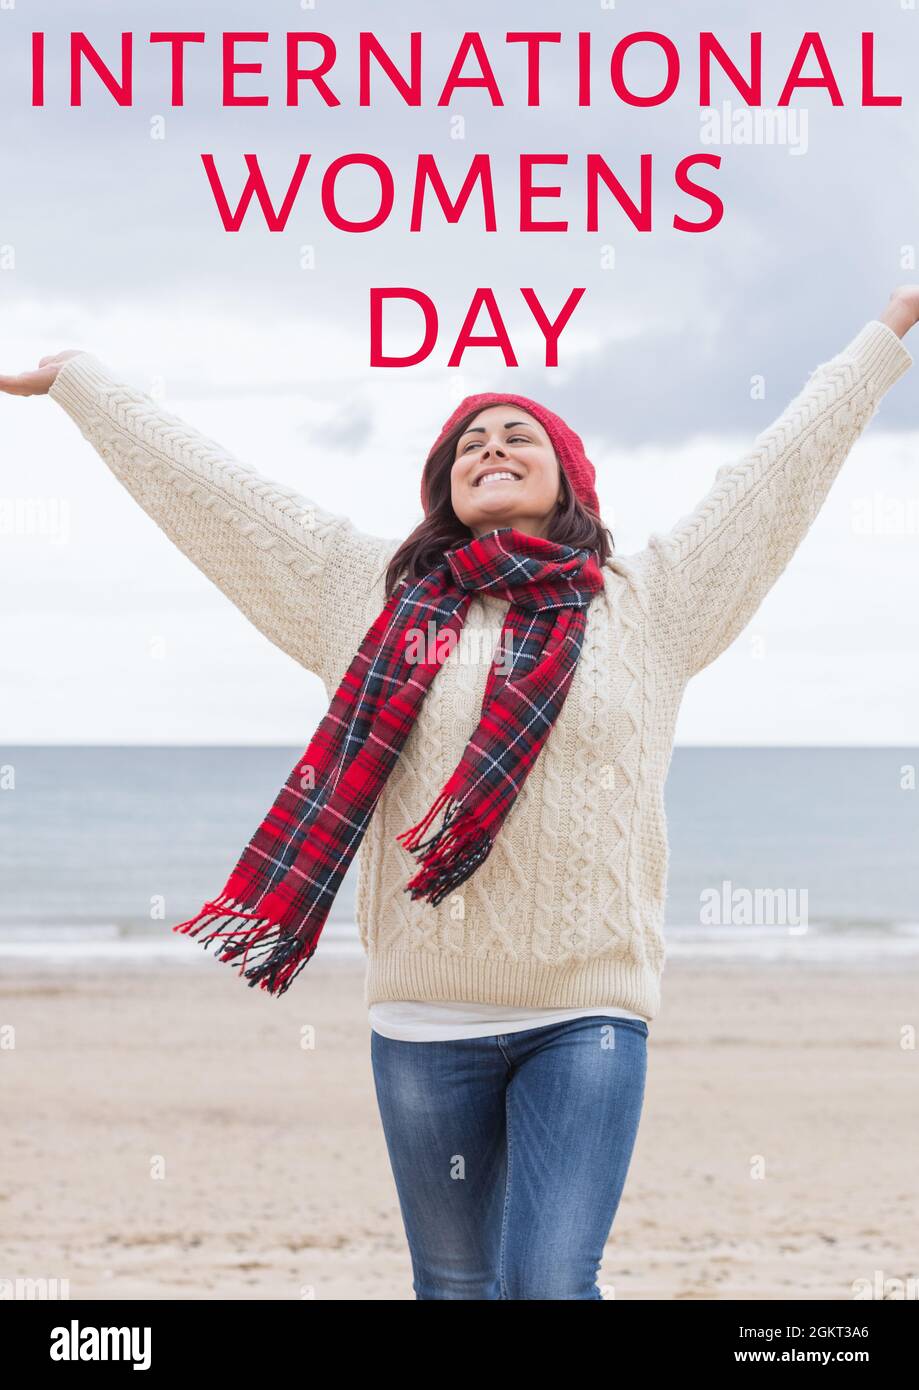 International women's day text over woman standing with arms wide open at the beach Stock Photo